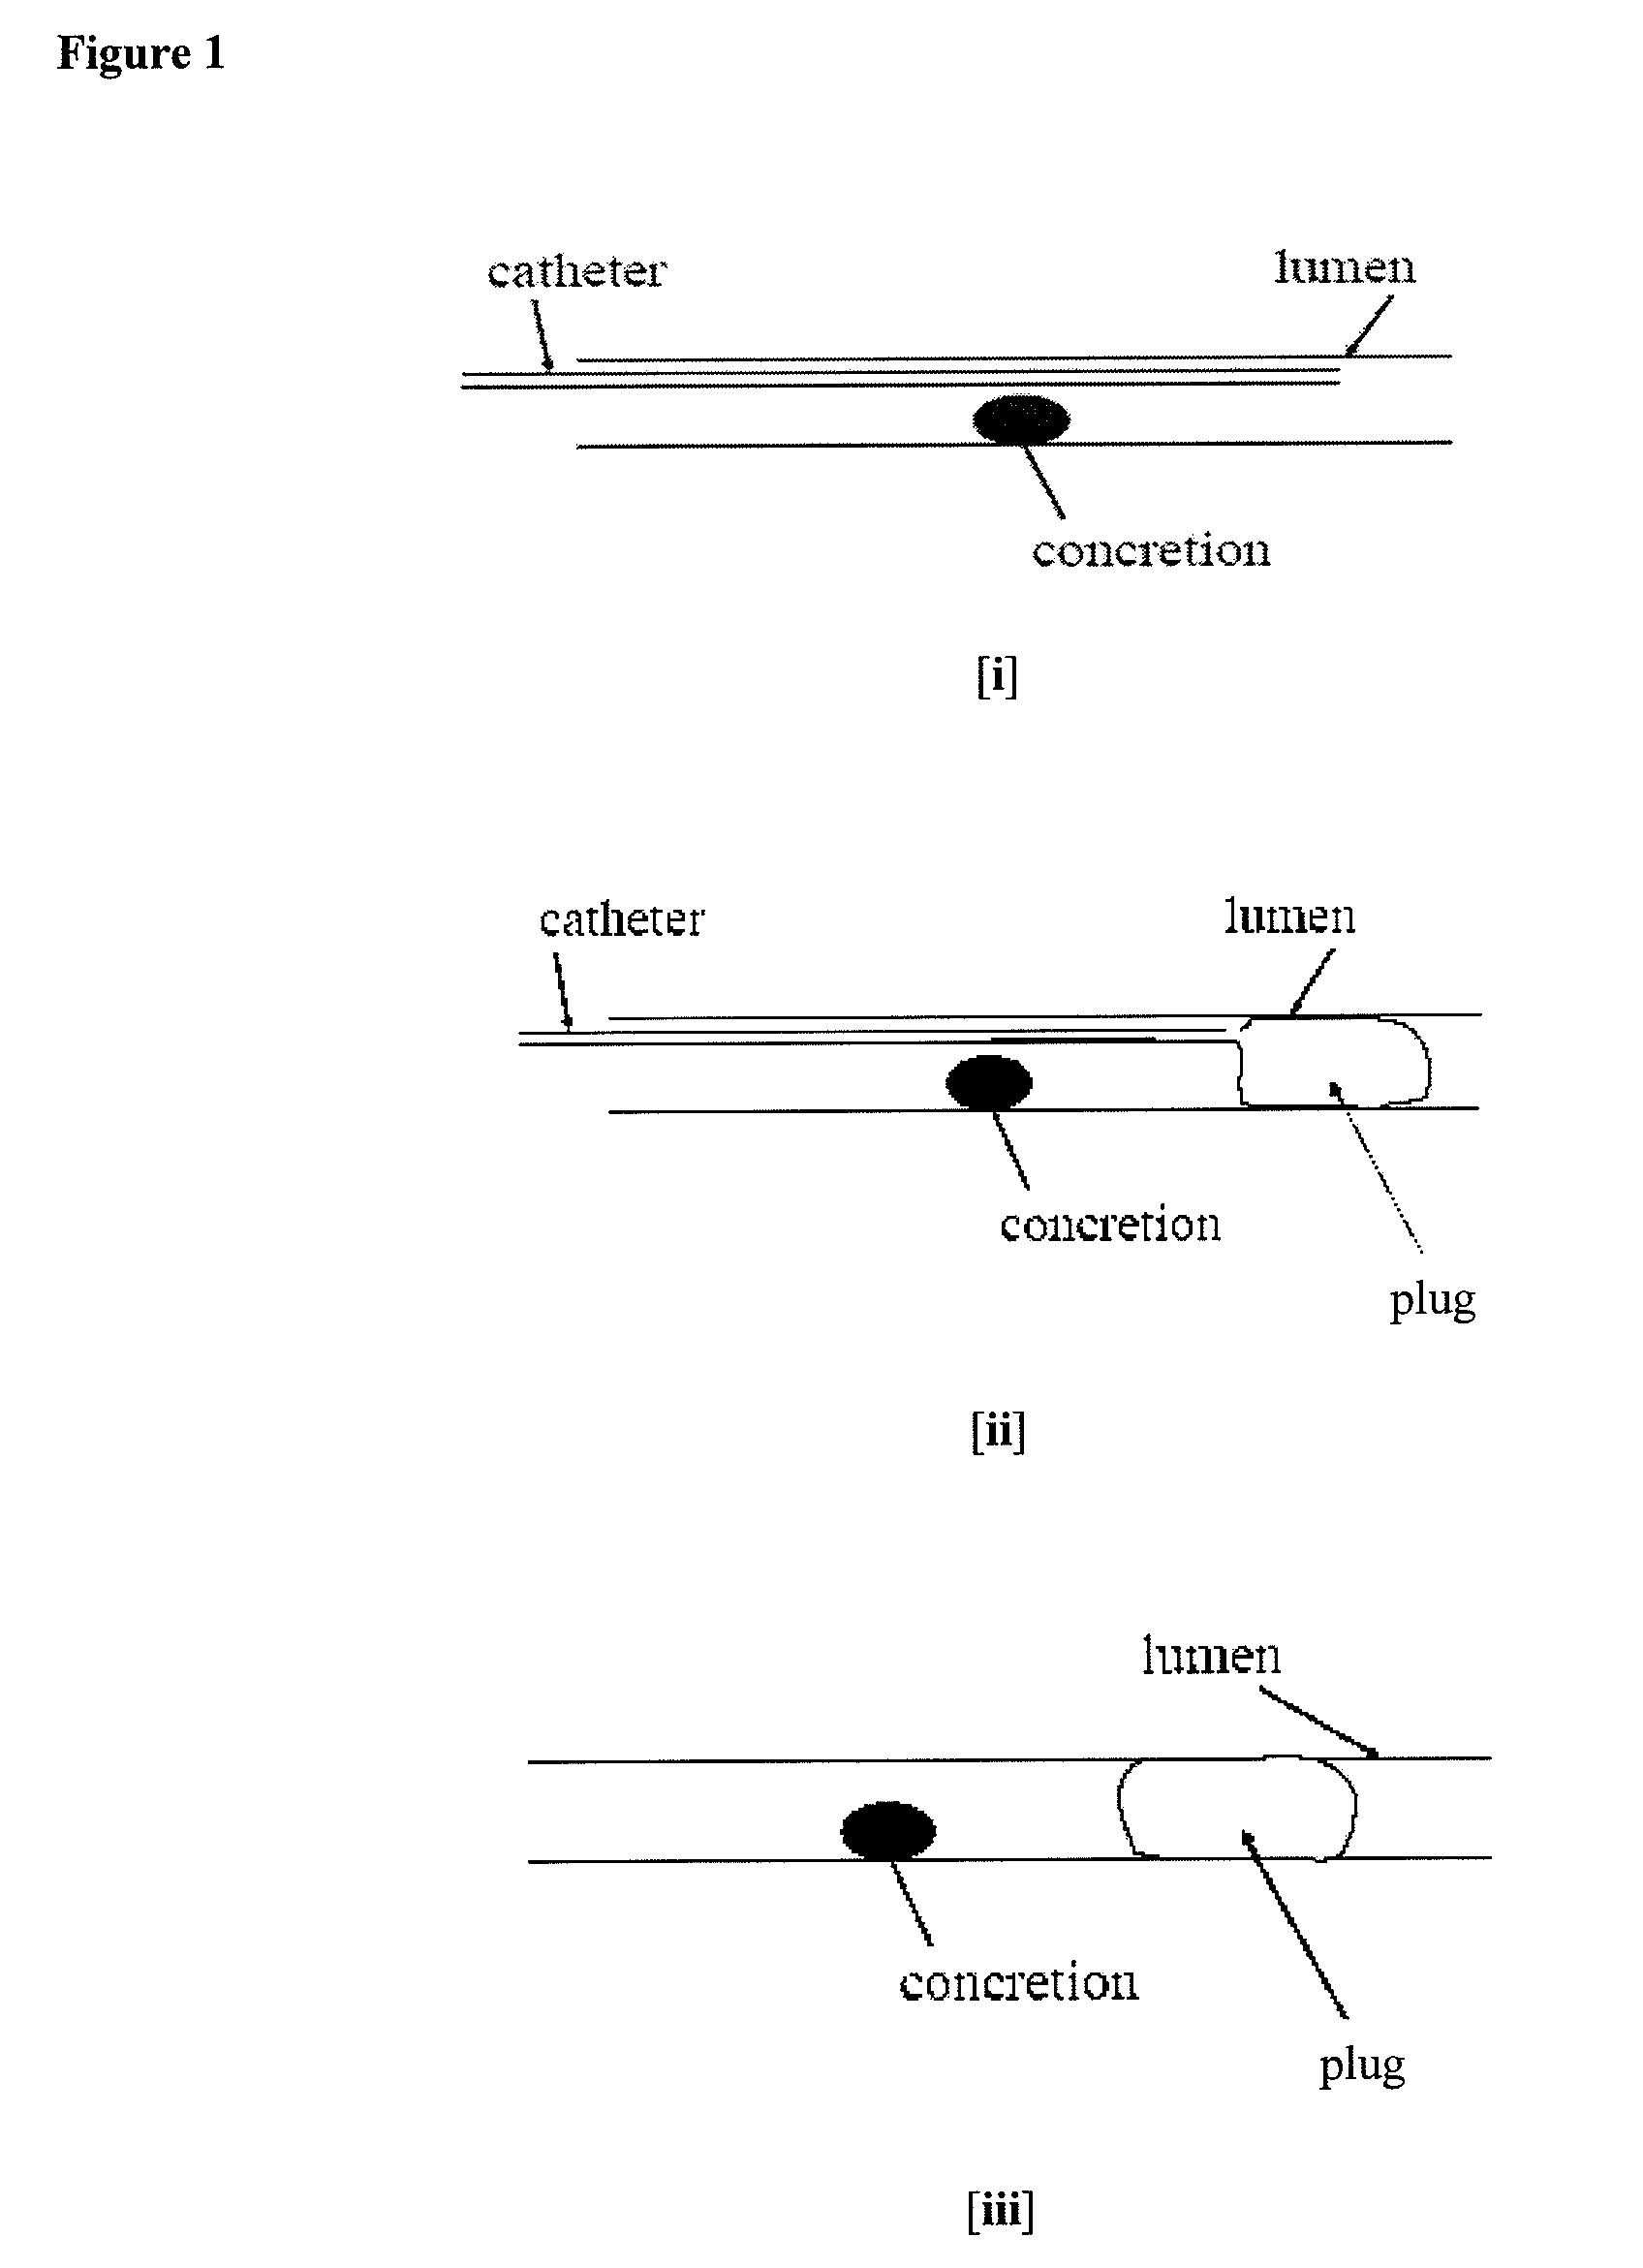 Methods for Preventing Retropulsion of Concretions and Fragments During Lithotripsy